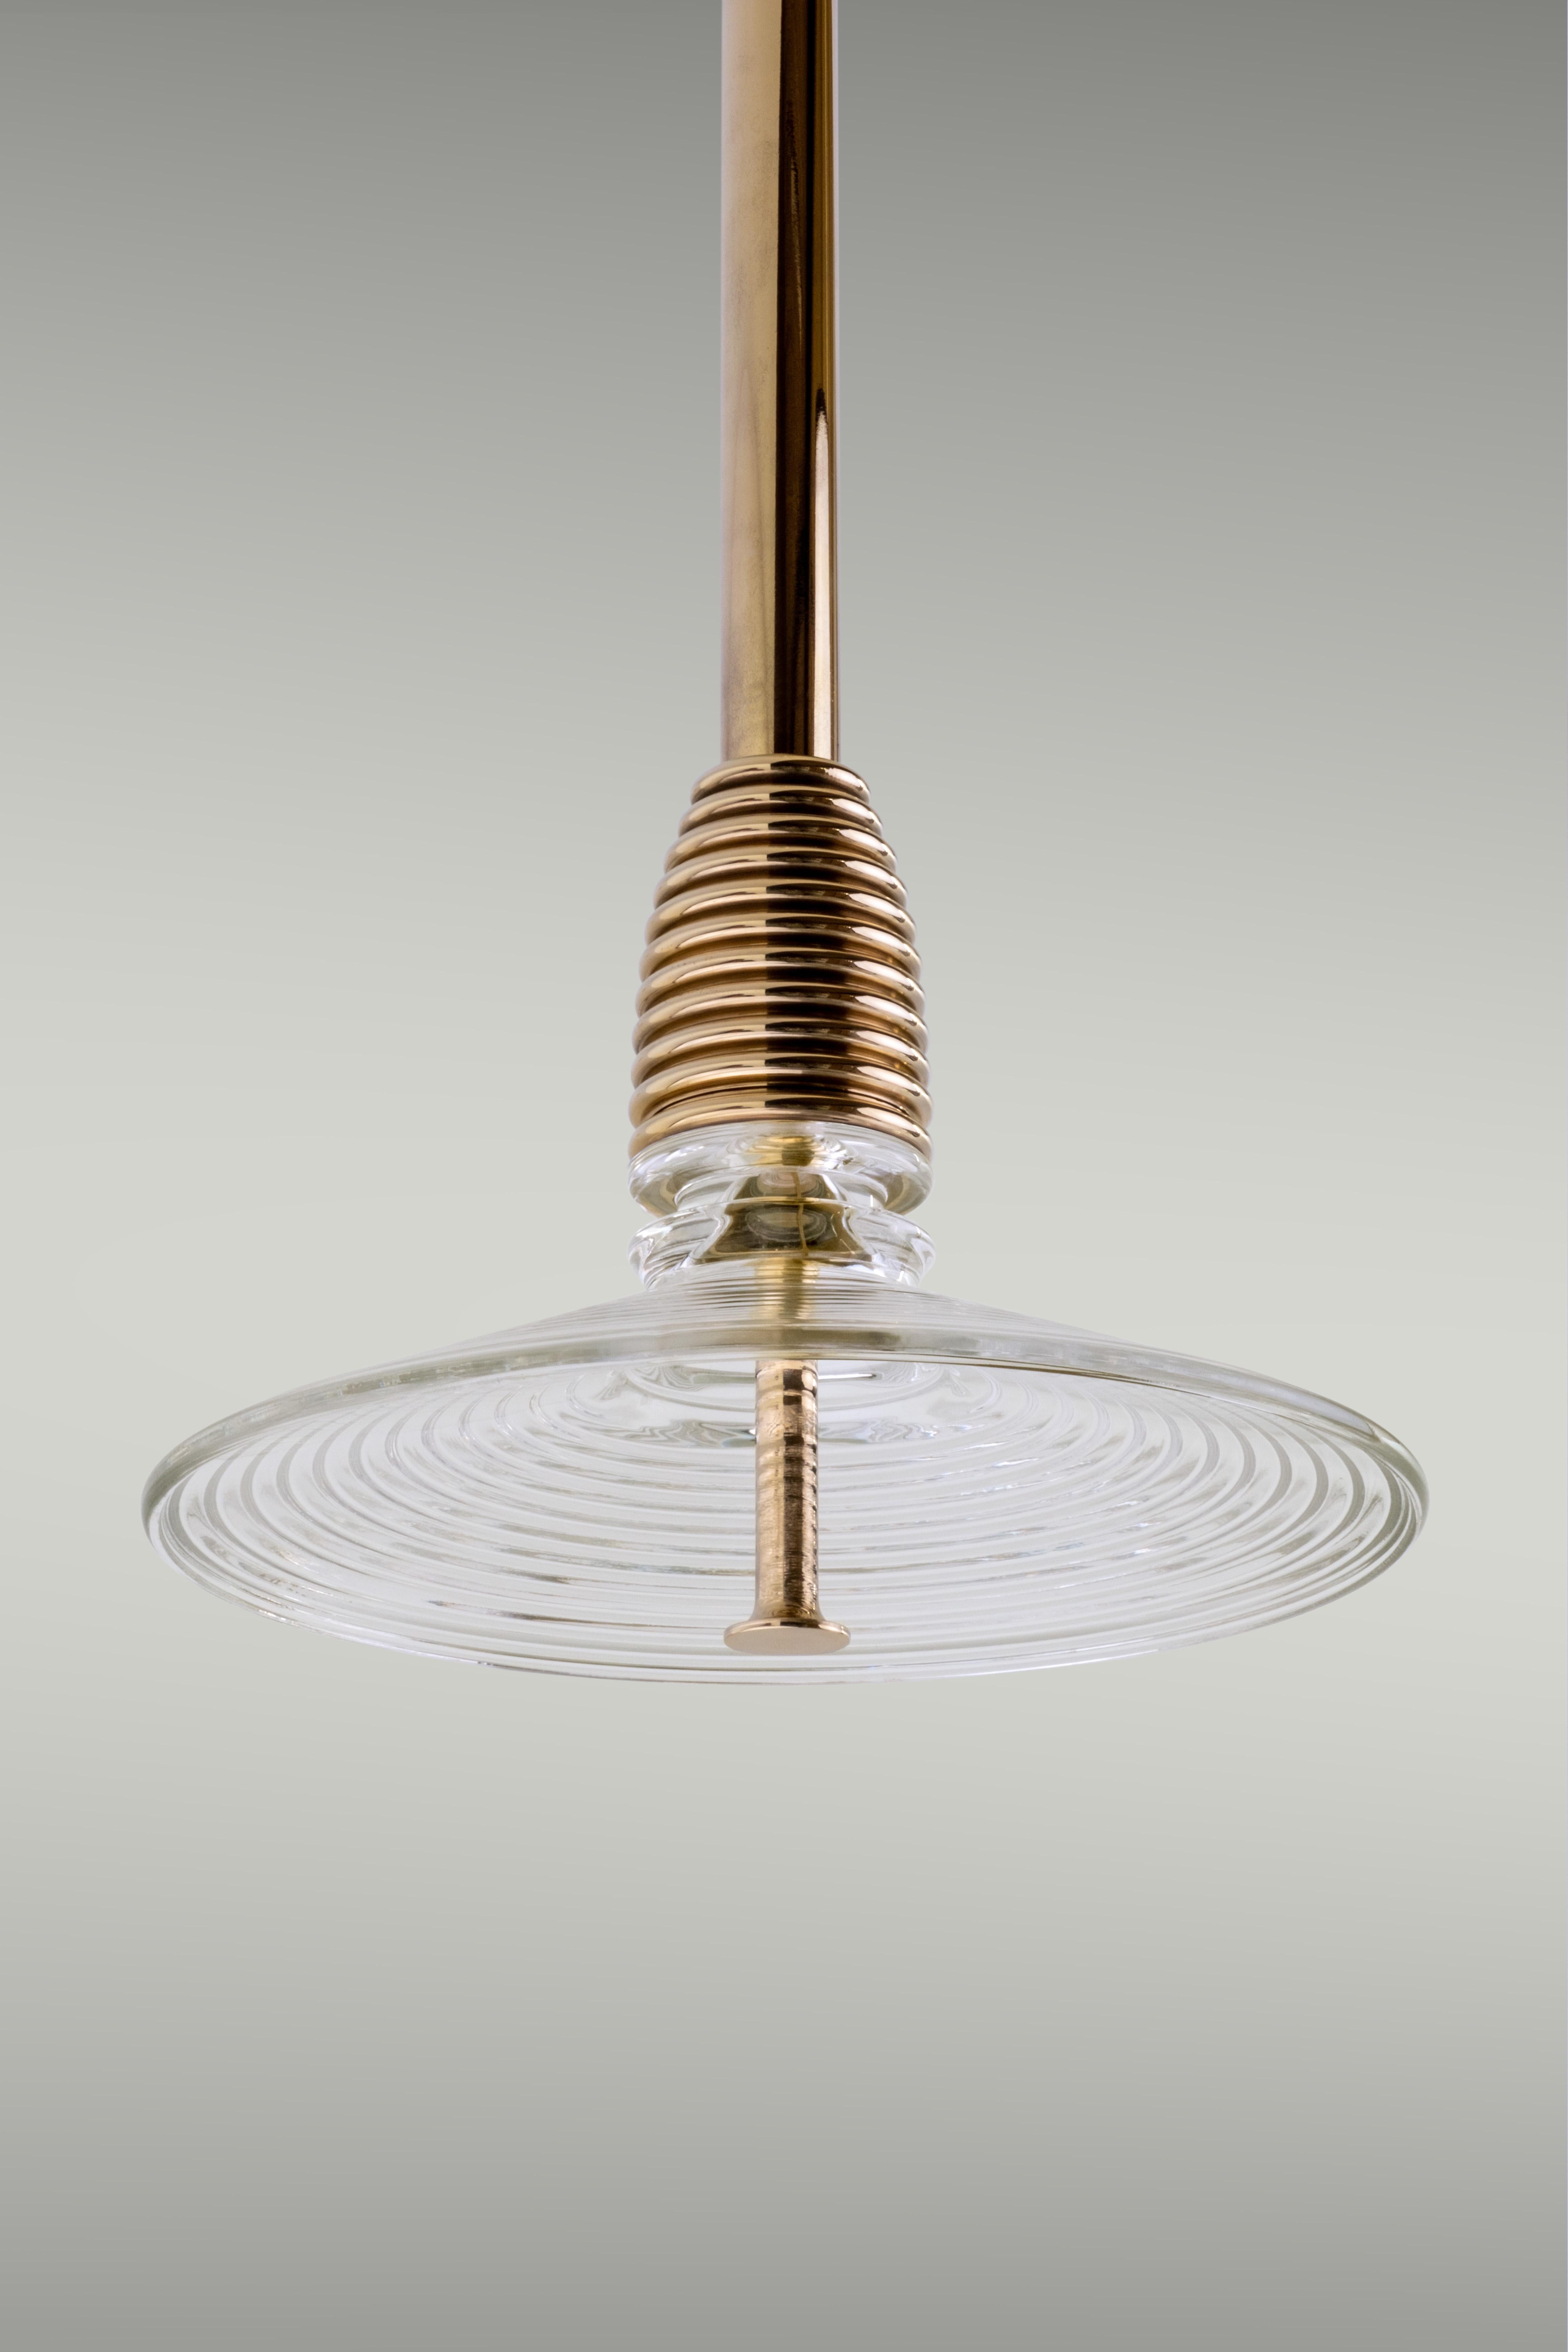 The Insulator 'B' Pendant in dark brass and frosted glass by NOVOCASTRIAN deco For Sale 9